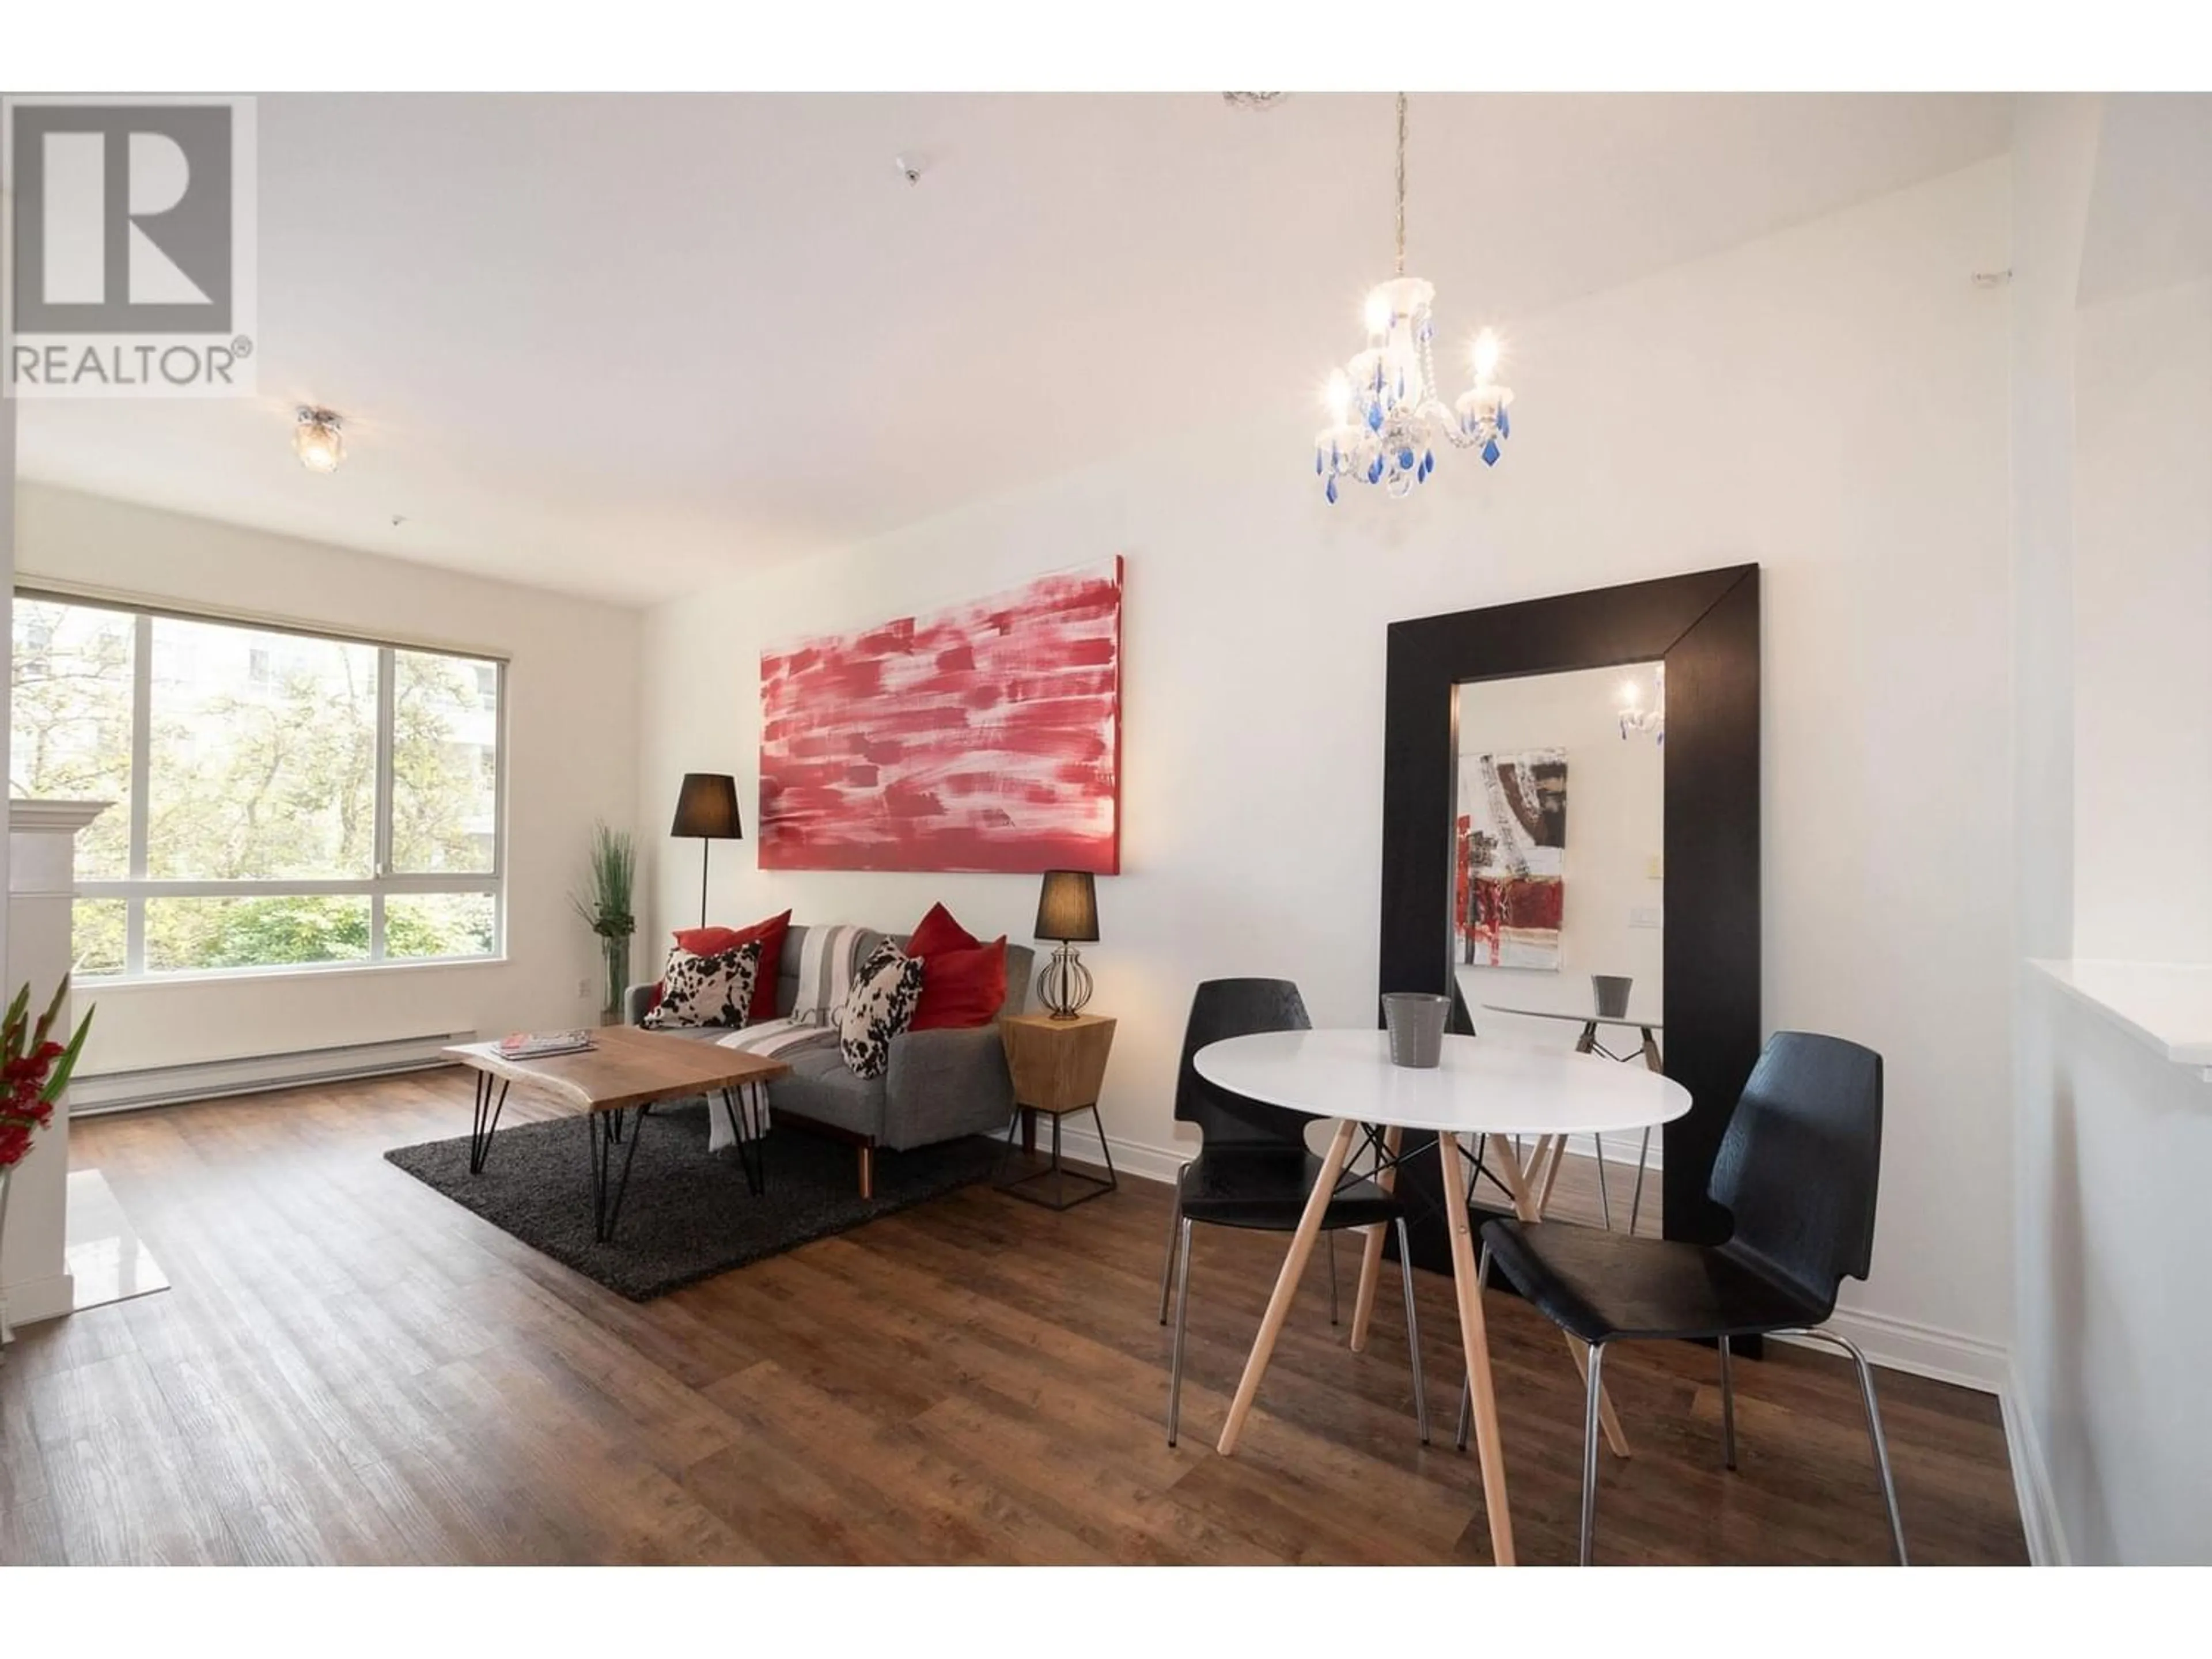 Other indoor space for 233 5735 HAMPTON PLACE, Vancouver British Columbia V6T2G8